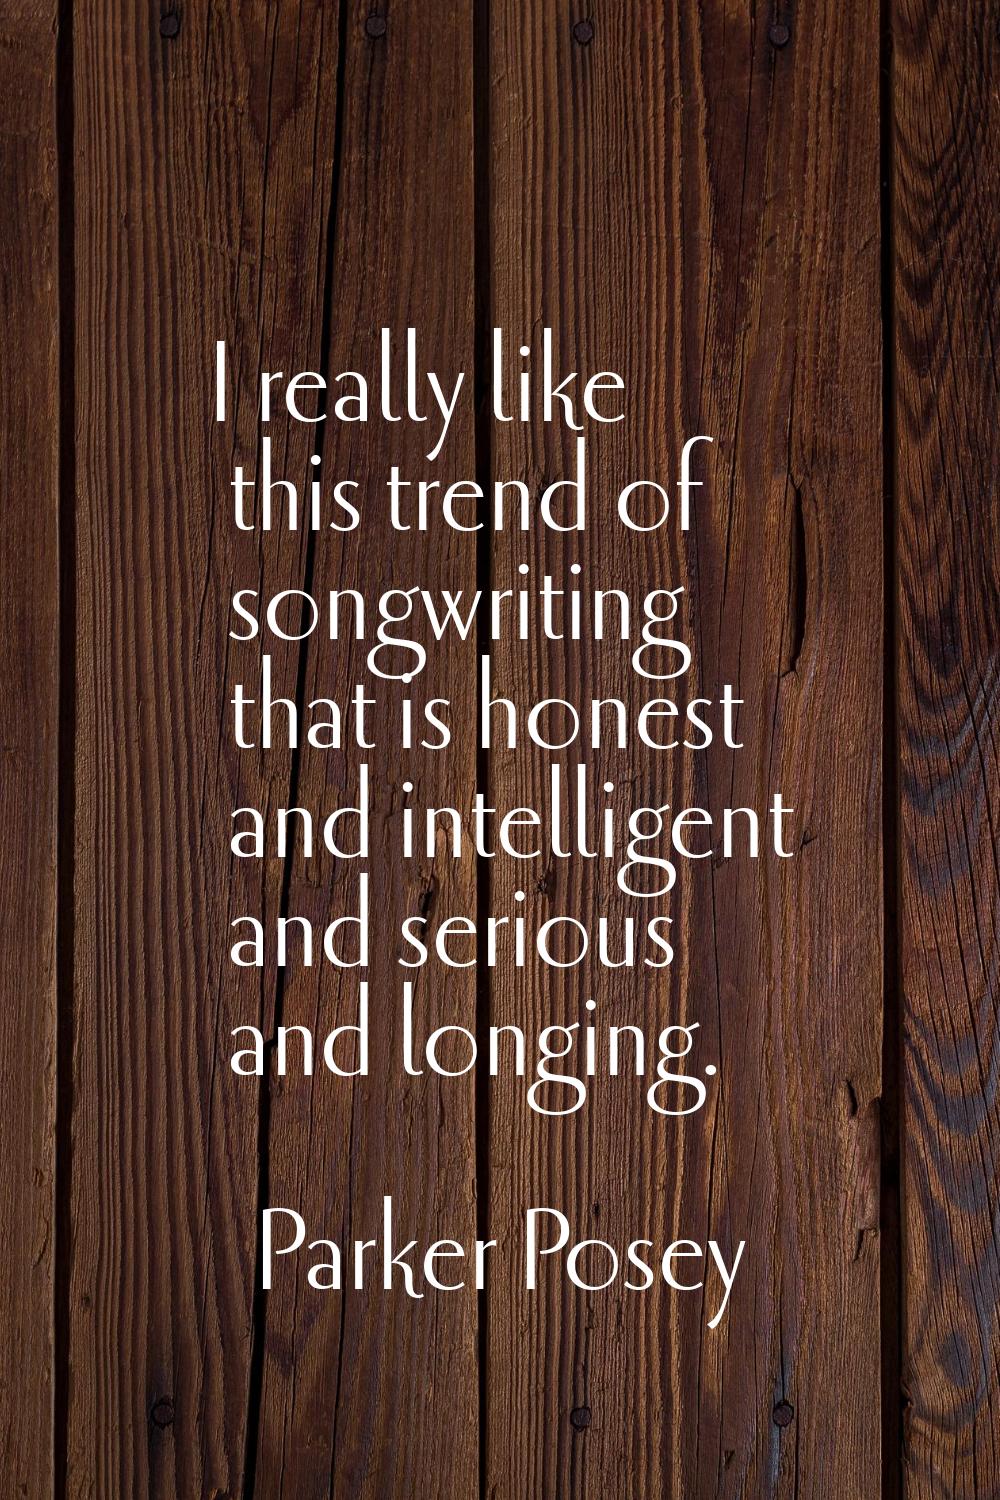 I really like this trend of songwriting that is honest and intelligent and serious and longing.